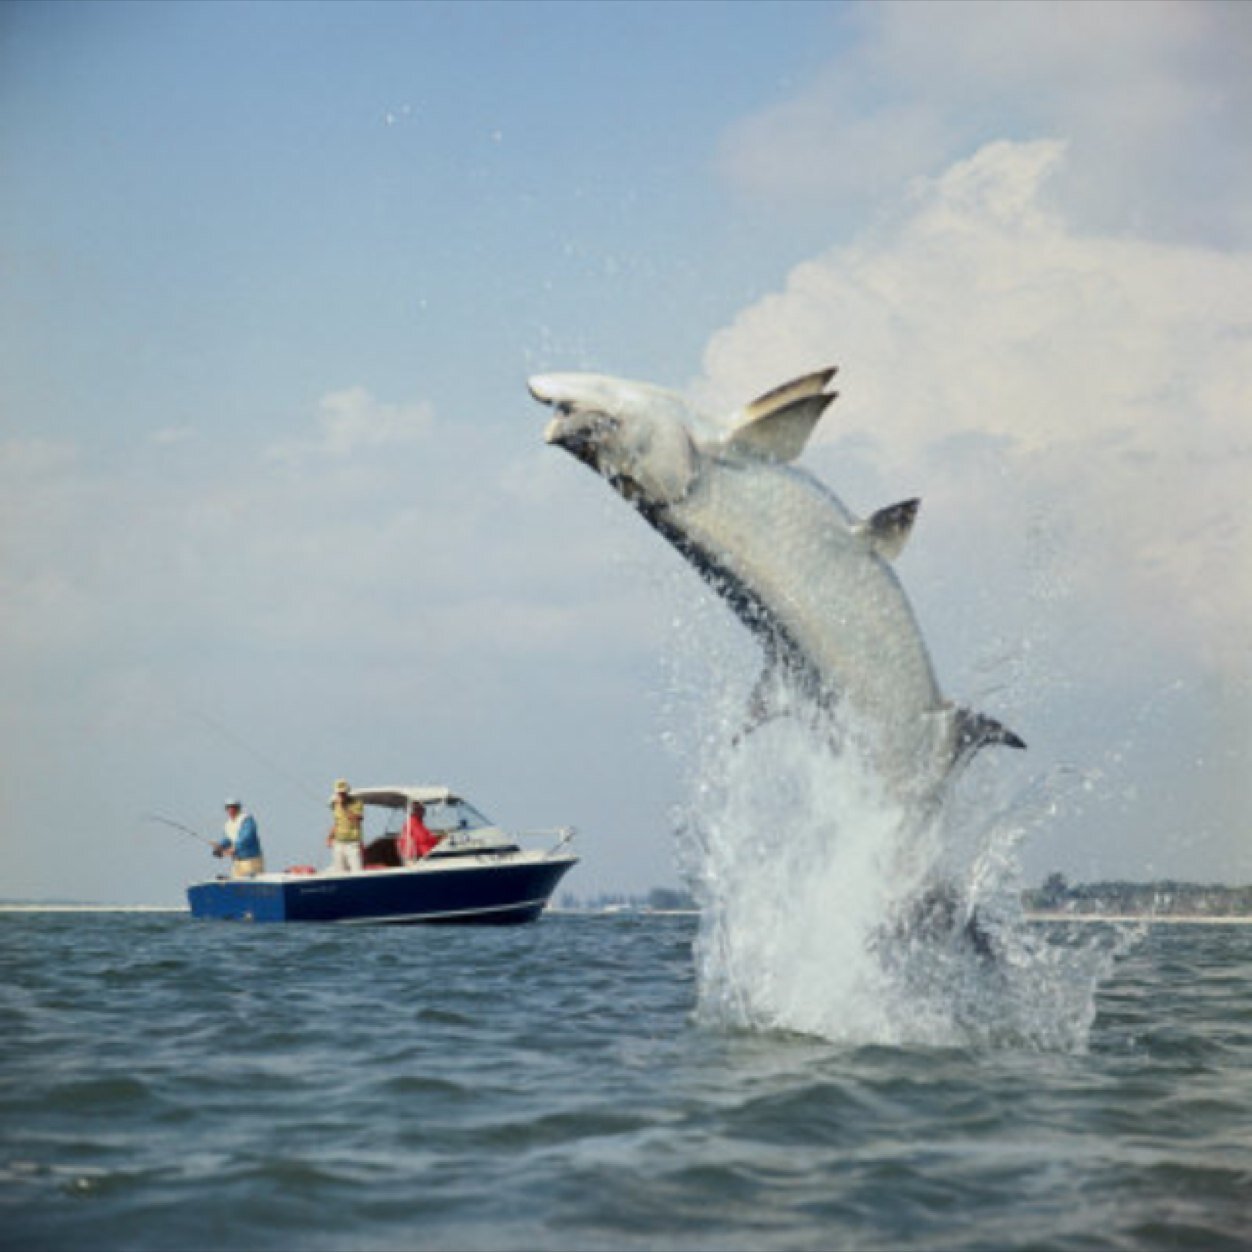 Share photos, tips, and info. about fishing in the Gulf of Mexico #FishingTheGulf